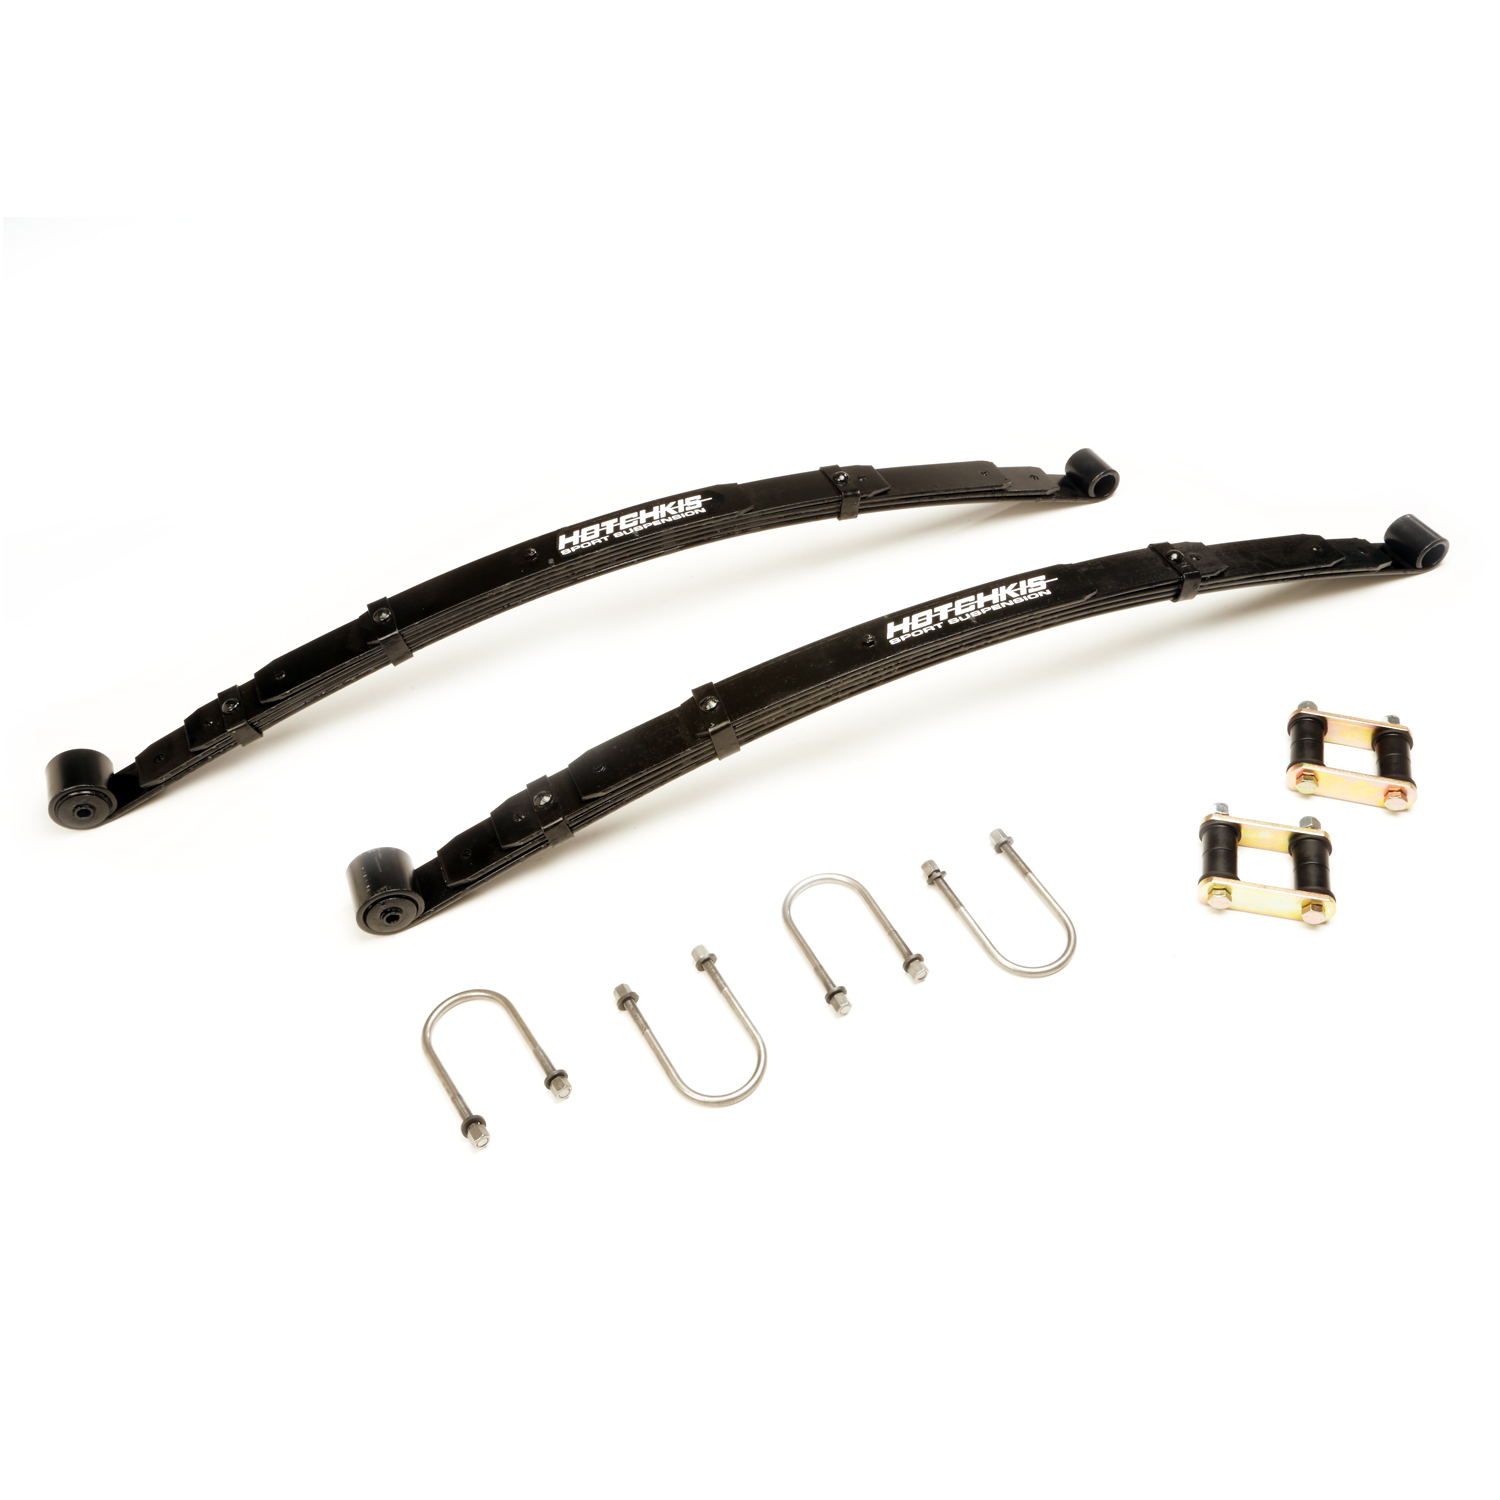 67-70 Mustang Performance Leaf Spring Kit By Hotchkis